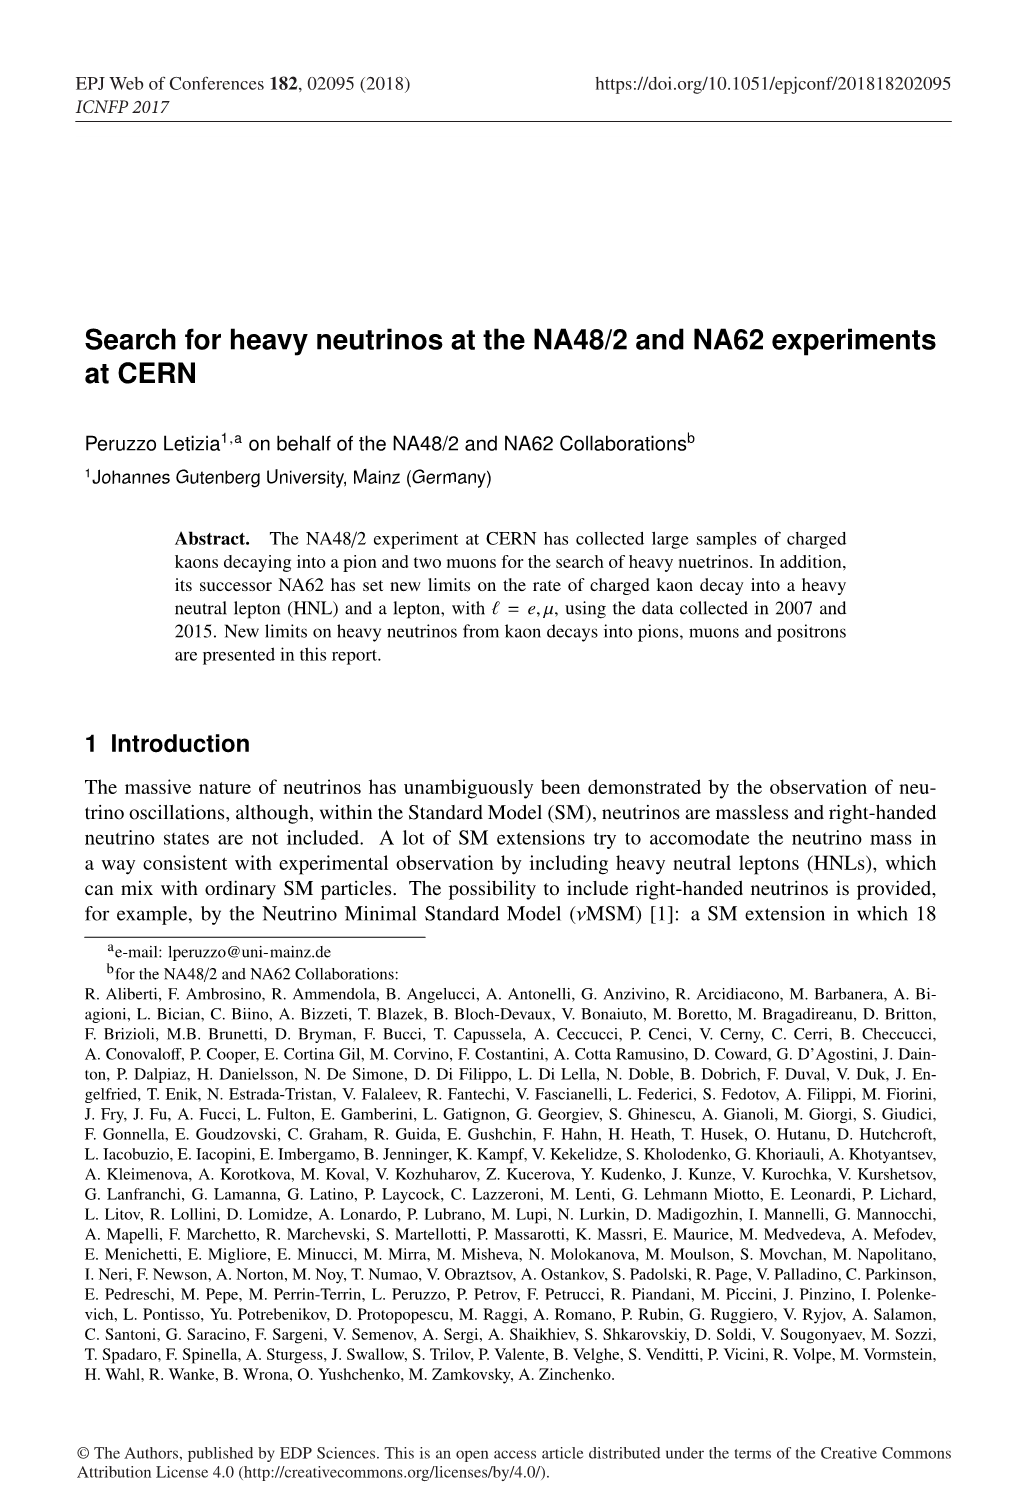 Search for Heavy Neutrinos at the NA48/2 and NA62 Experiments at CERN